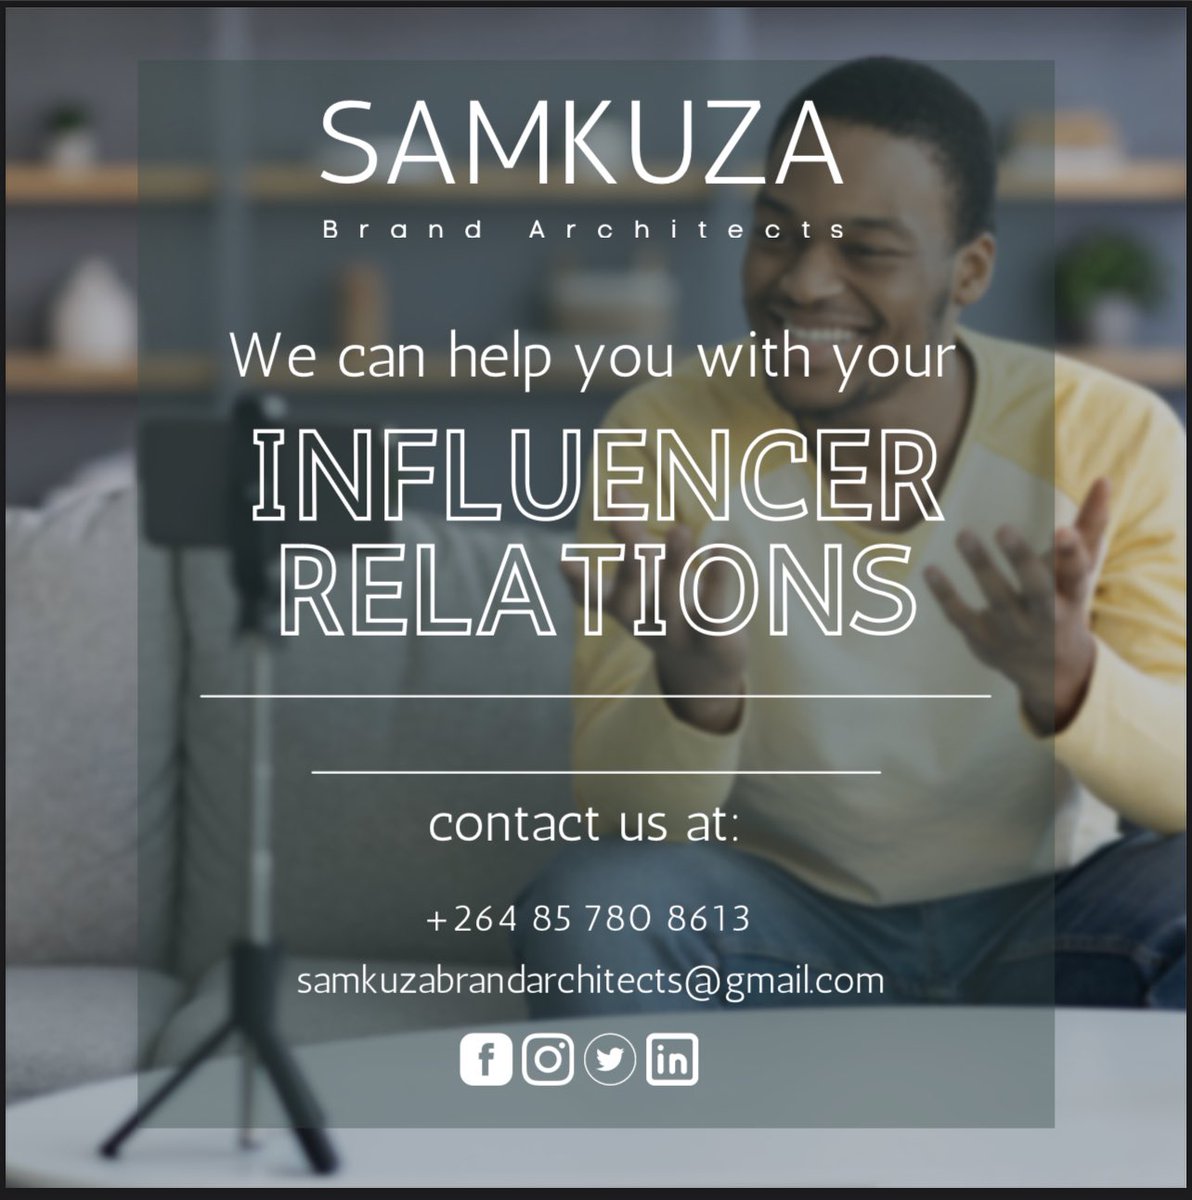 #InfluencerRelations is the new #MediaRelations
We can help you draft and execute an influencer relations strategy. 

Engage us… 

#InfluencerRelations #marketingstrategy #PRAgency #EventManagement #BrandManagement #InfluencerMarketing #BrandAgency #EventPR #StakeholderRelations